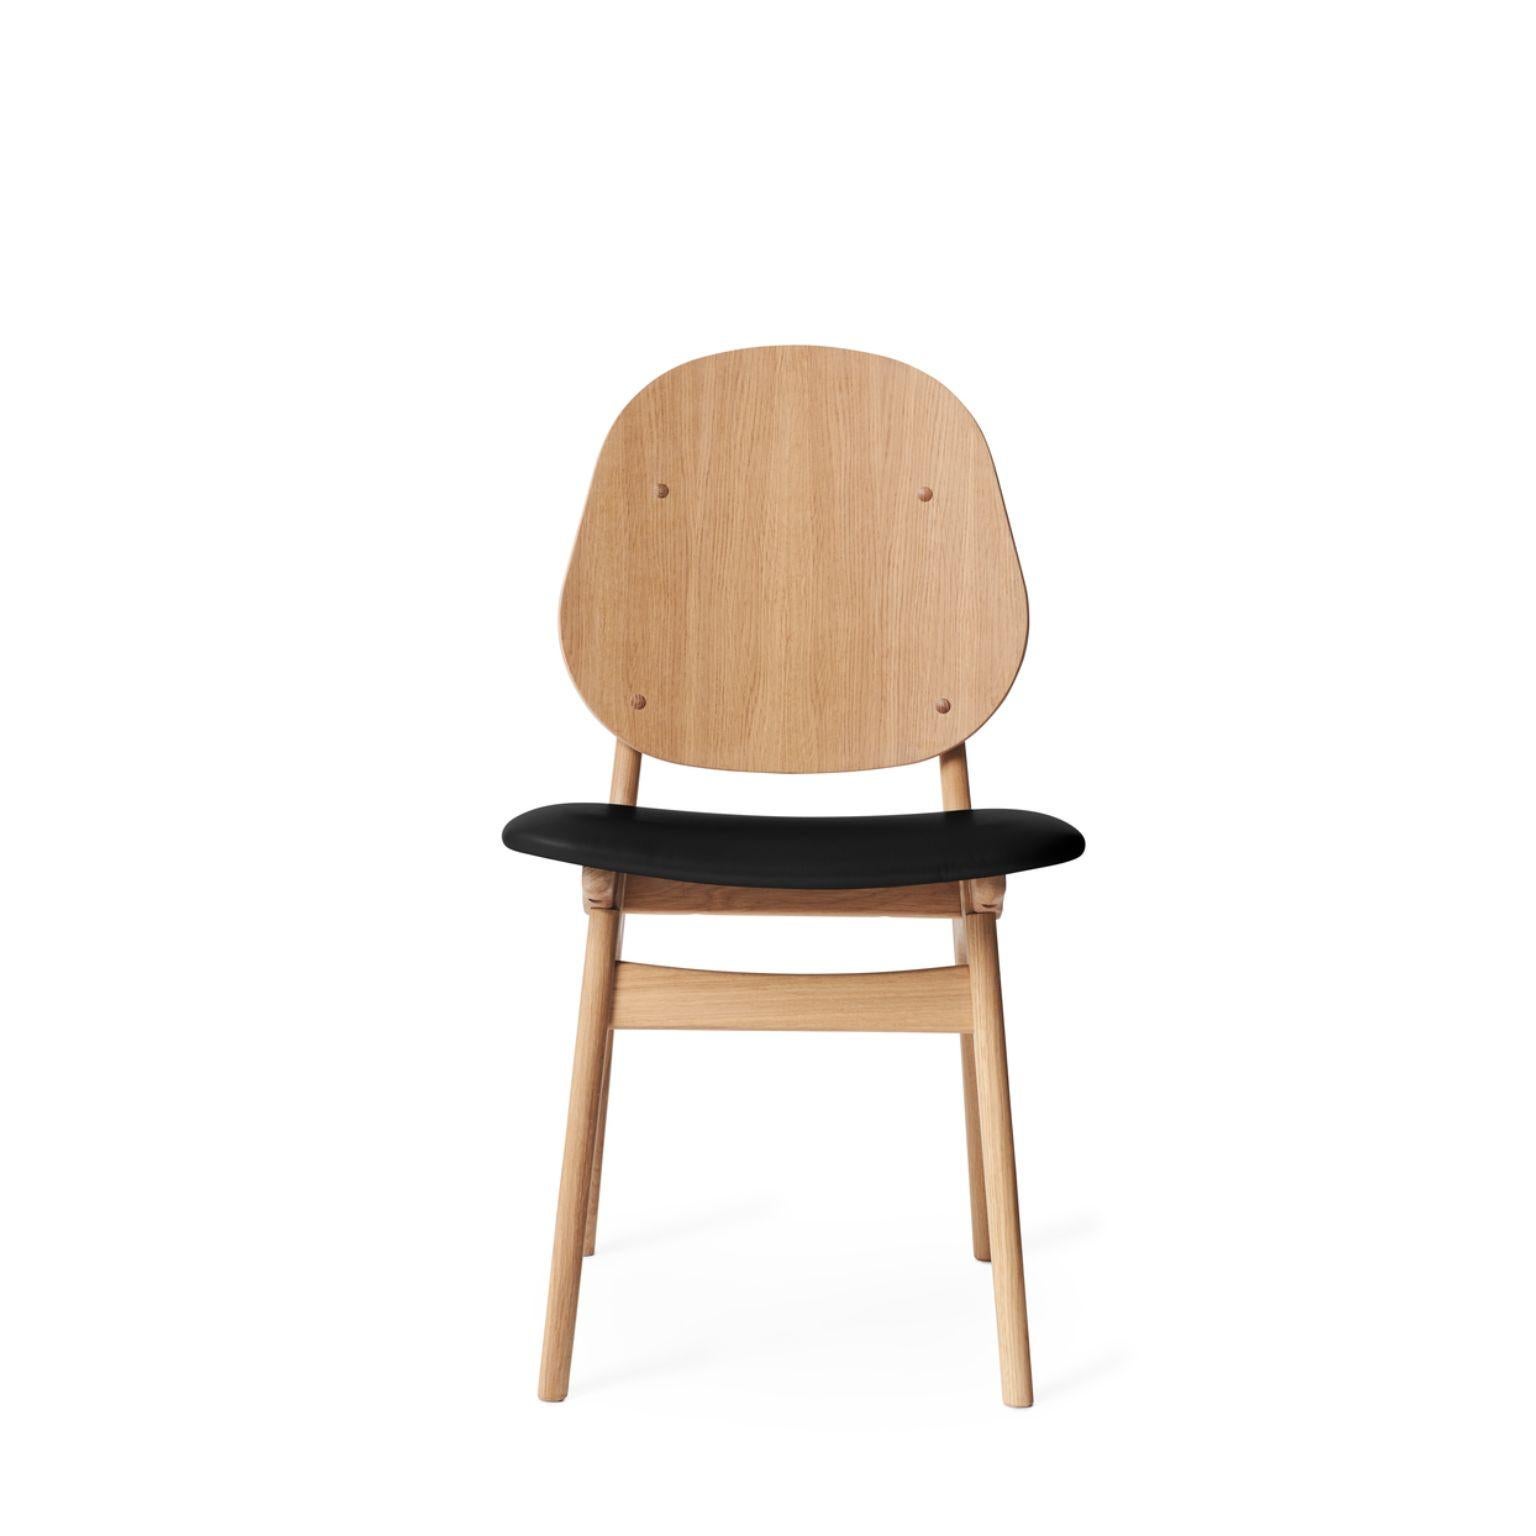 Noble chair white oiled oak black by Warm Nordic
Dimensions: D55 x W47 x H 85 cm
Material: White oiled solid oak, Veneer seat and back, Textile or leather upholstery.
Weight: 7.5 kg
Also available in different colours and finishes. 

An